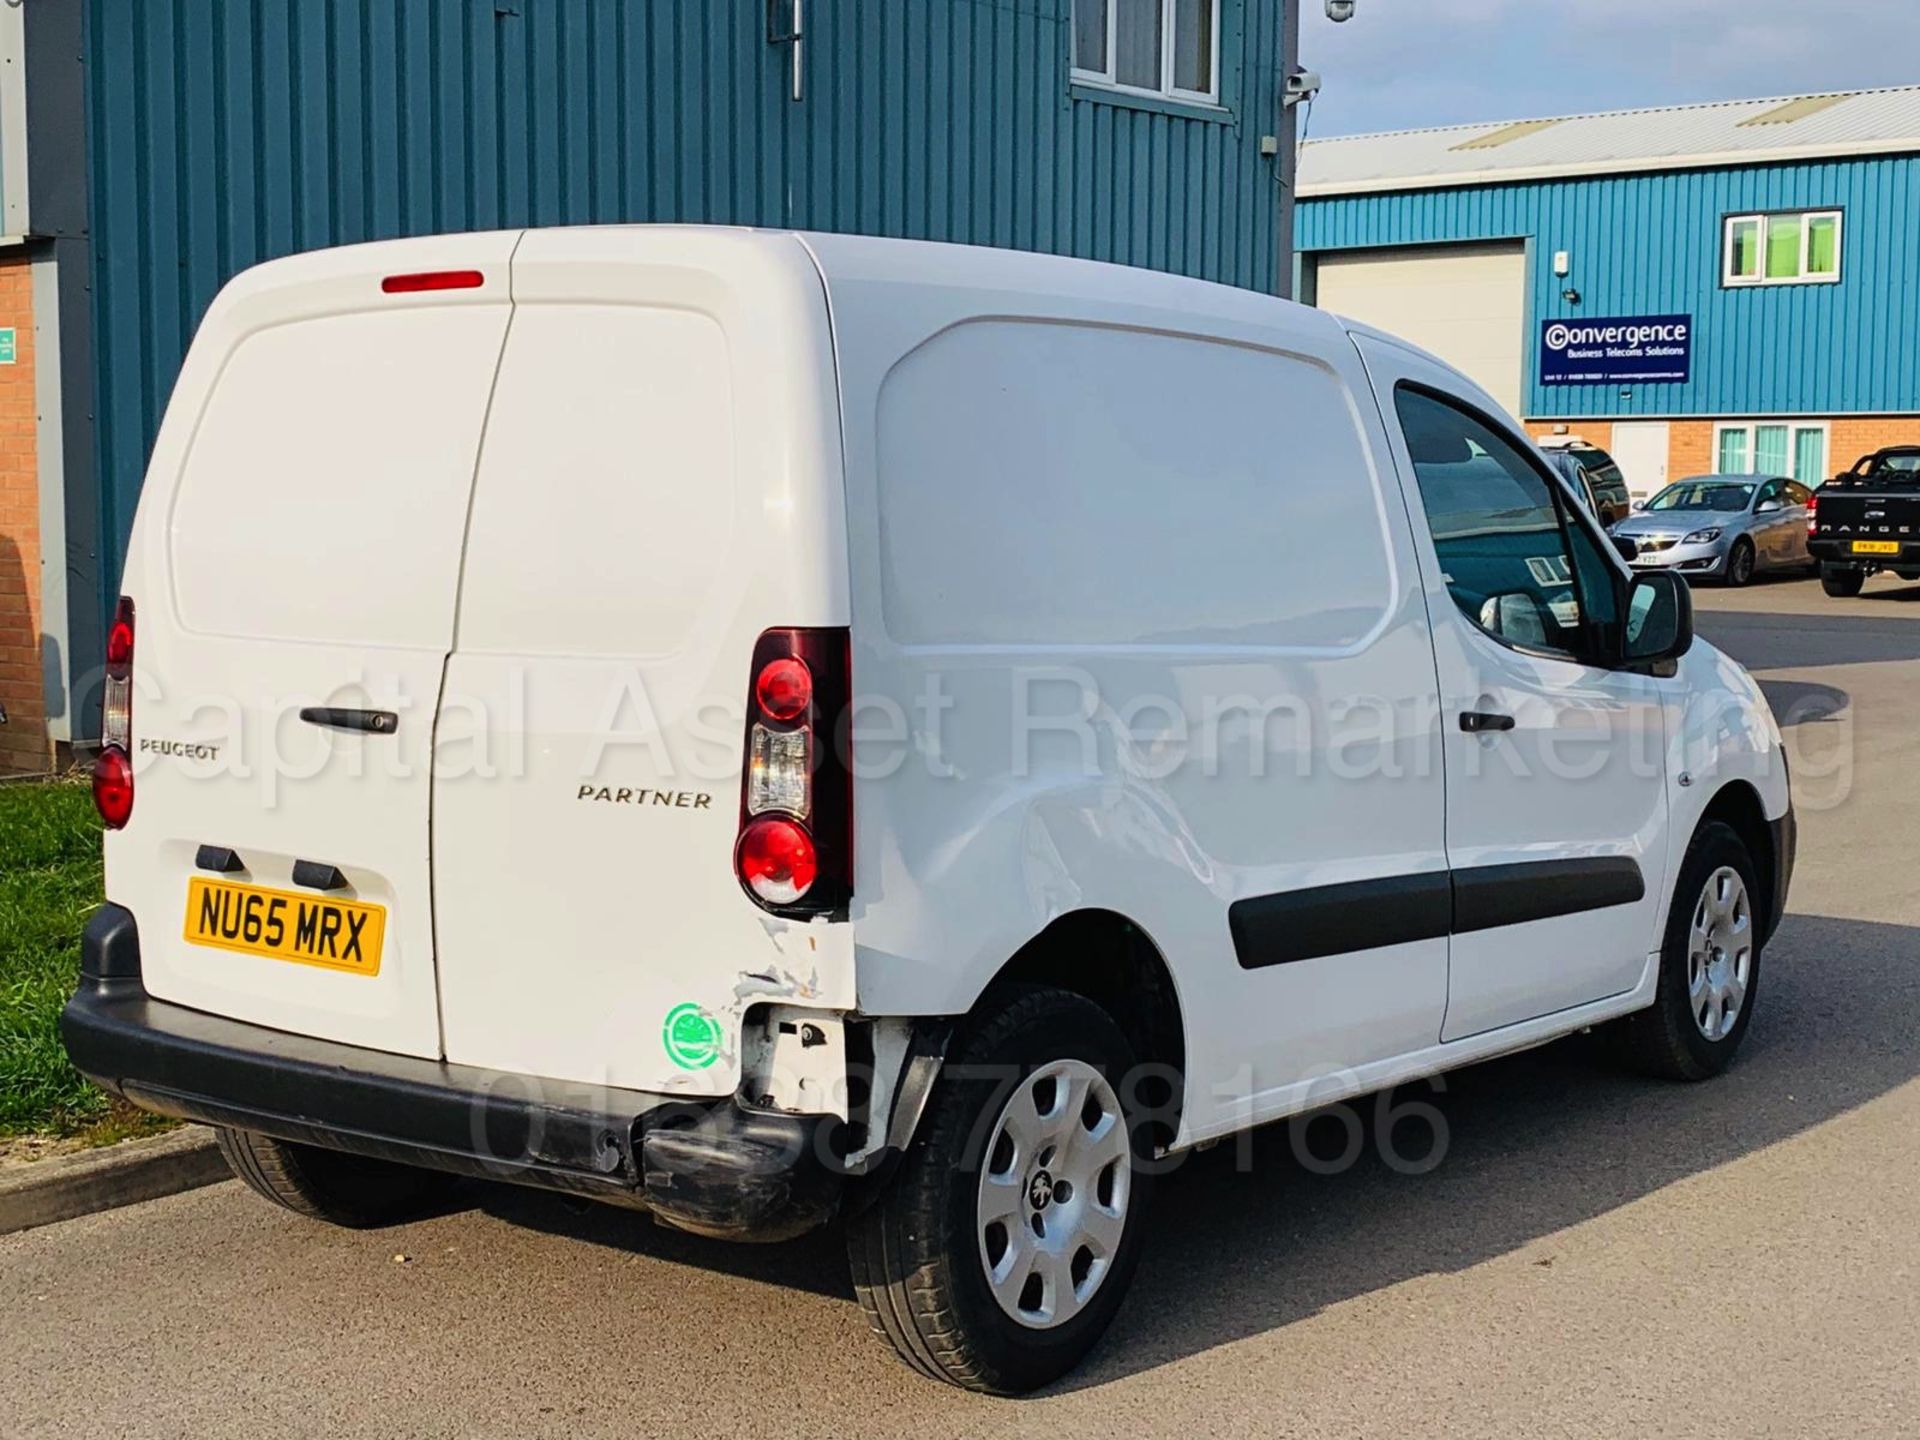 (ON SALE) PEUGEOT PARTNER *SWB - PANEL VAN* (2016 MODEL) '1.6 HDI - 90 BHP' (1 OWNER FROM NEW) - Image 7 of 21